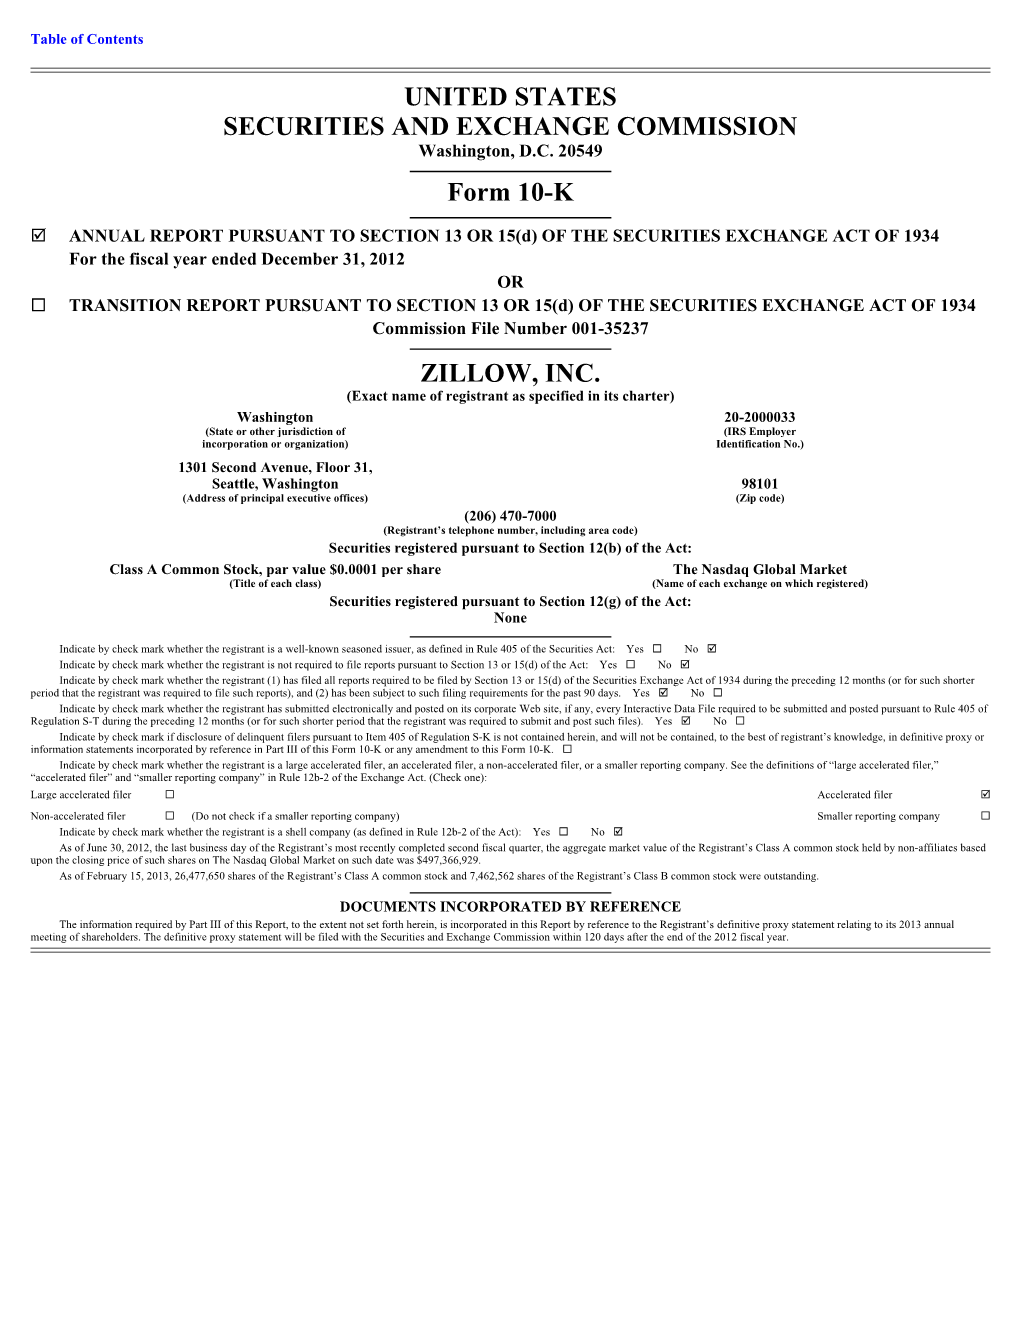 UNITED STATES SECURITIES and EXCHANGE COMMISSION Form